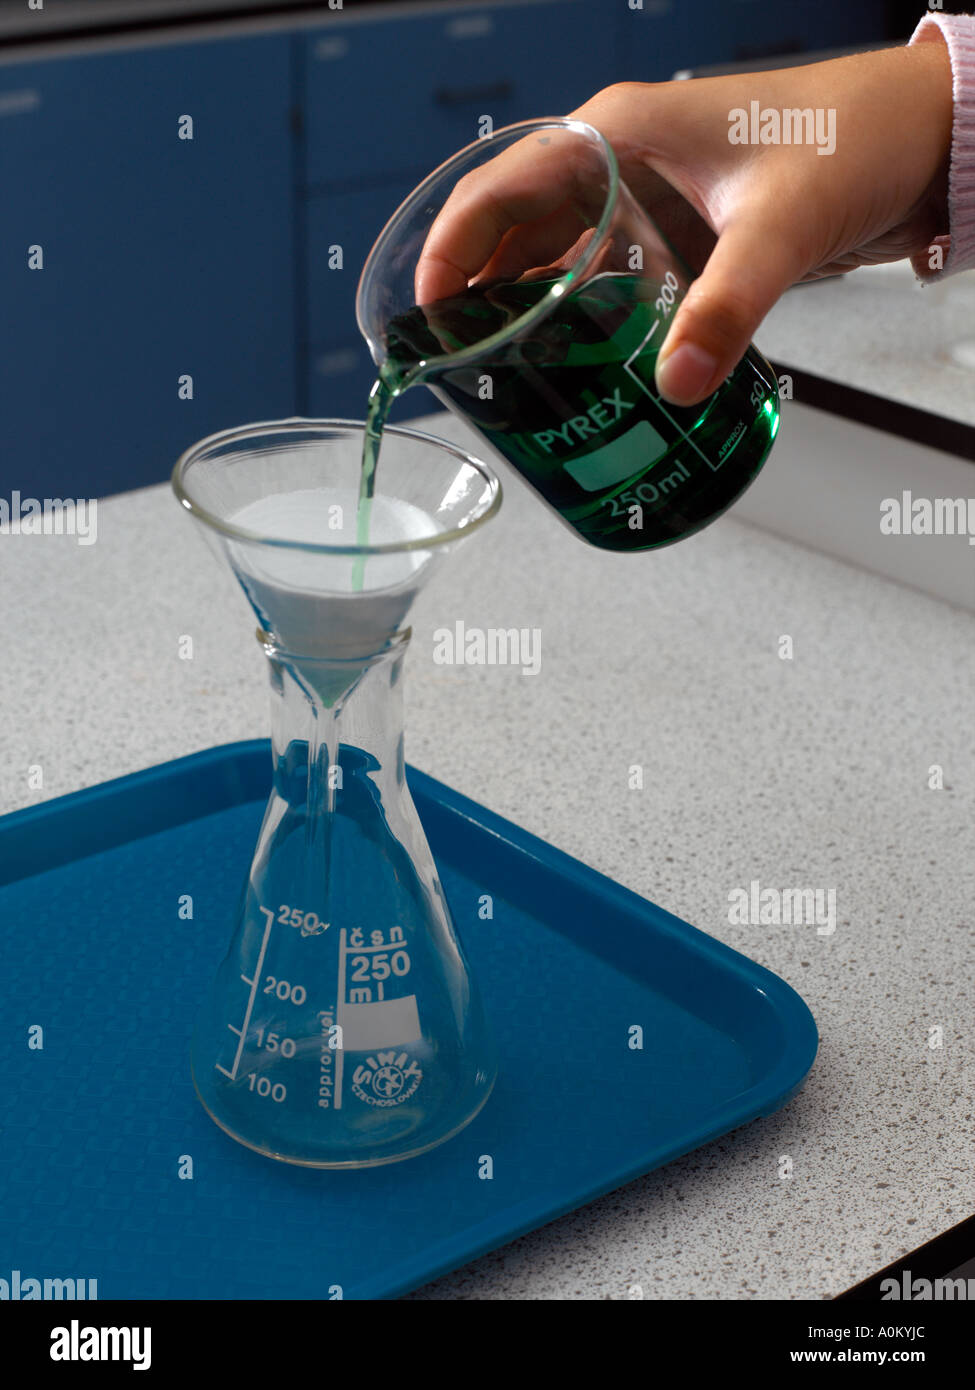 Filter Funnel being used to Filter a Mixture Stock Photo